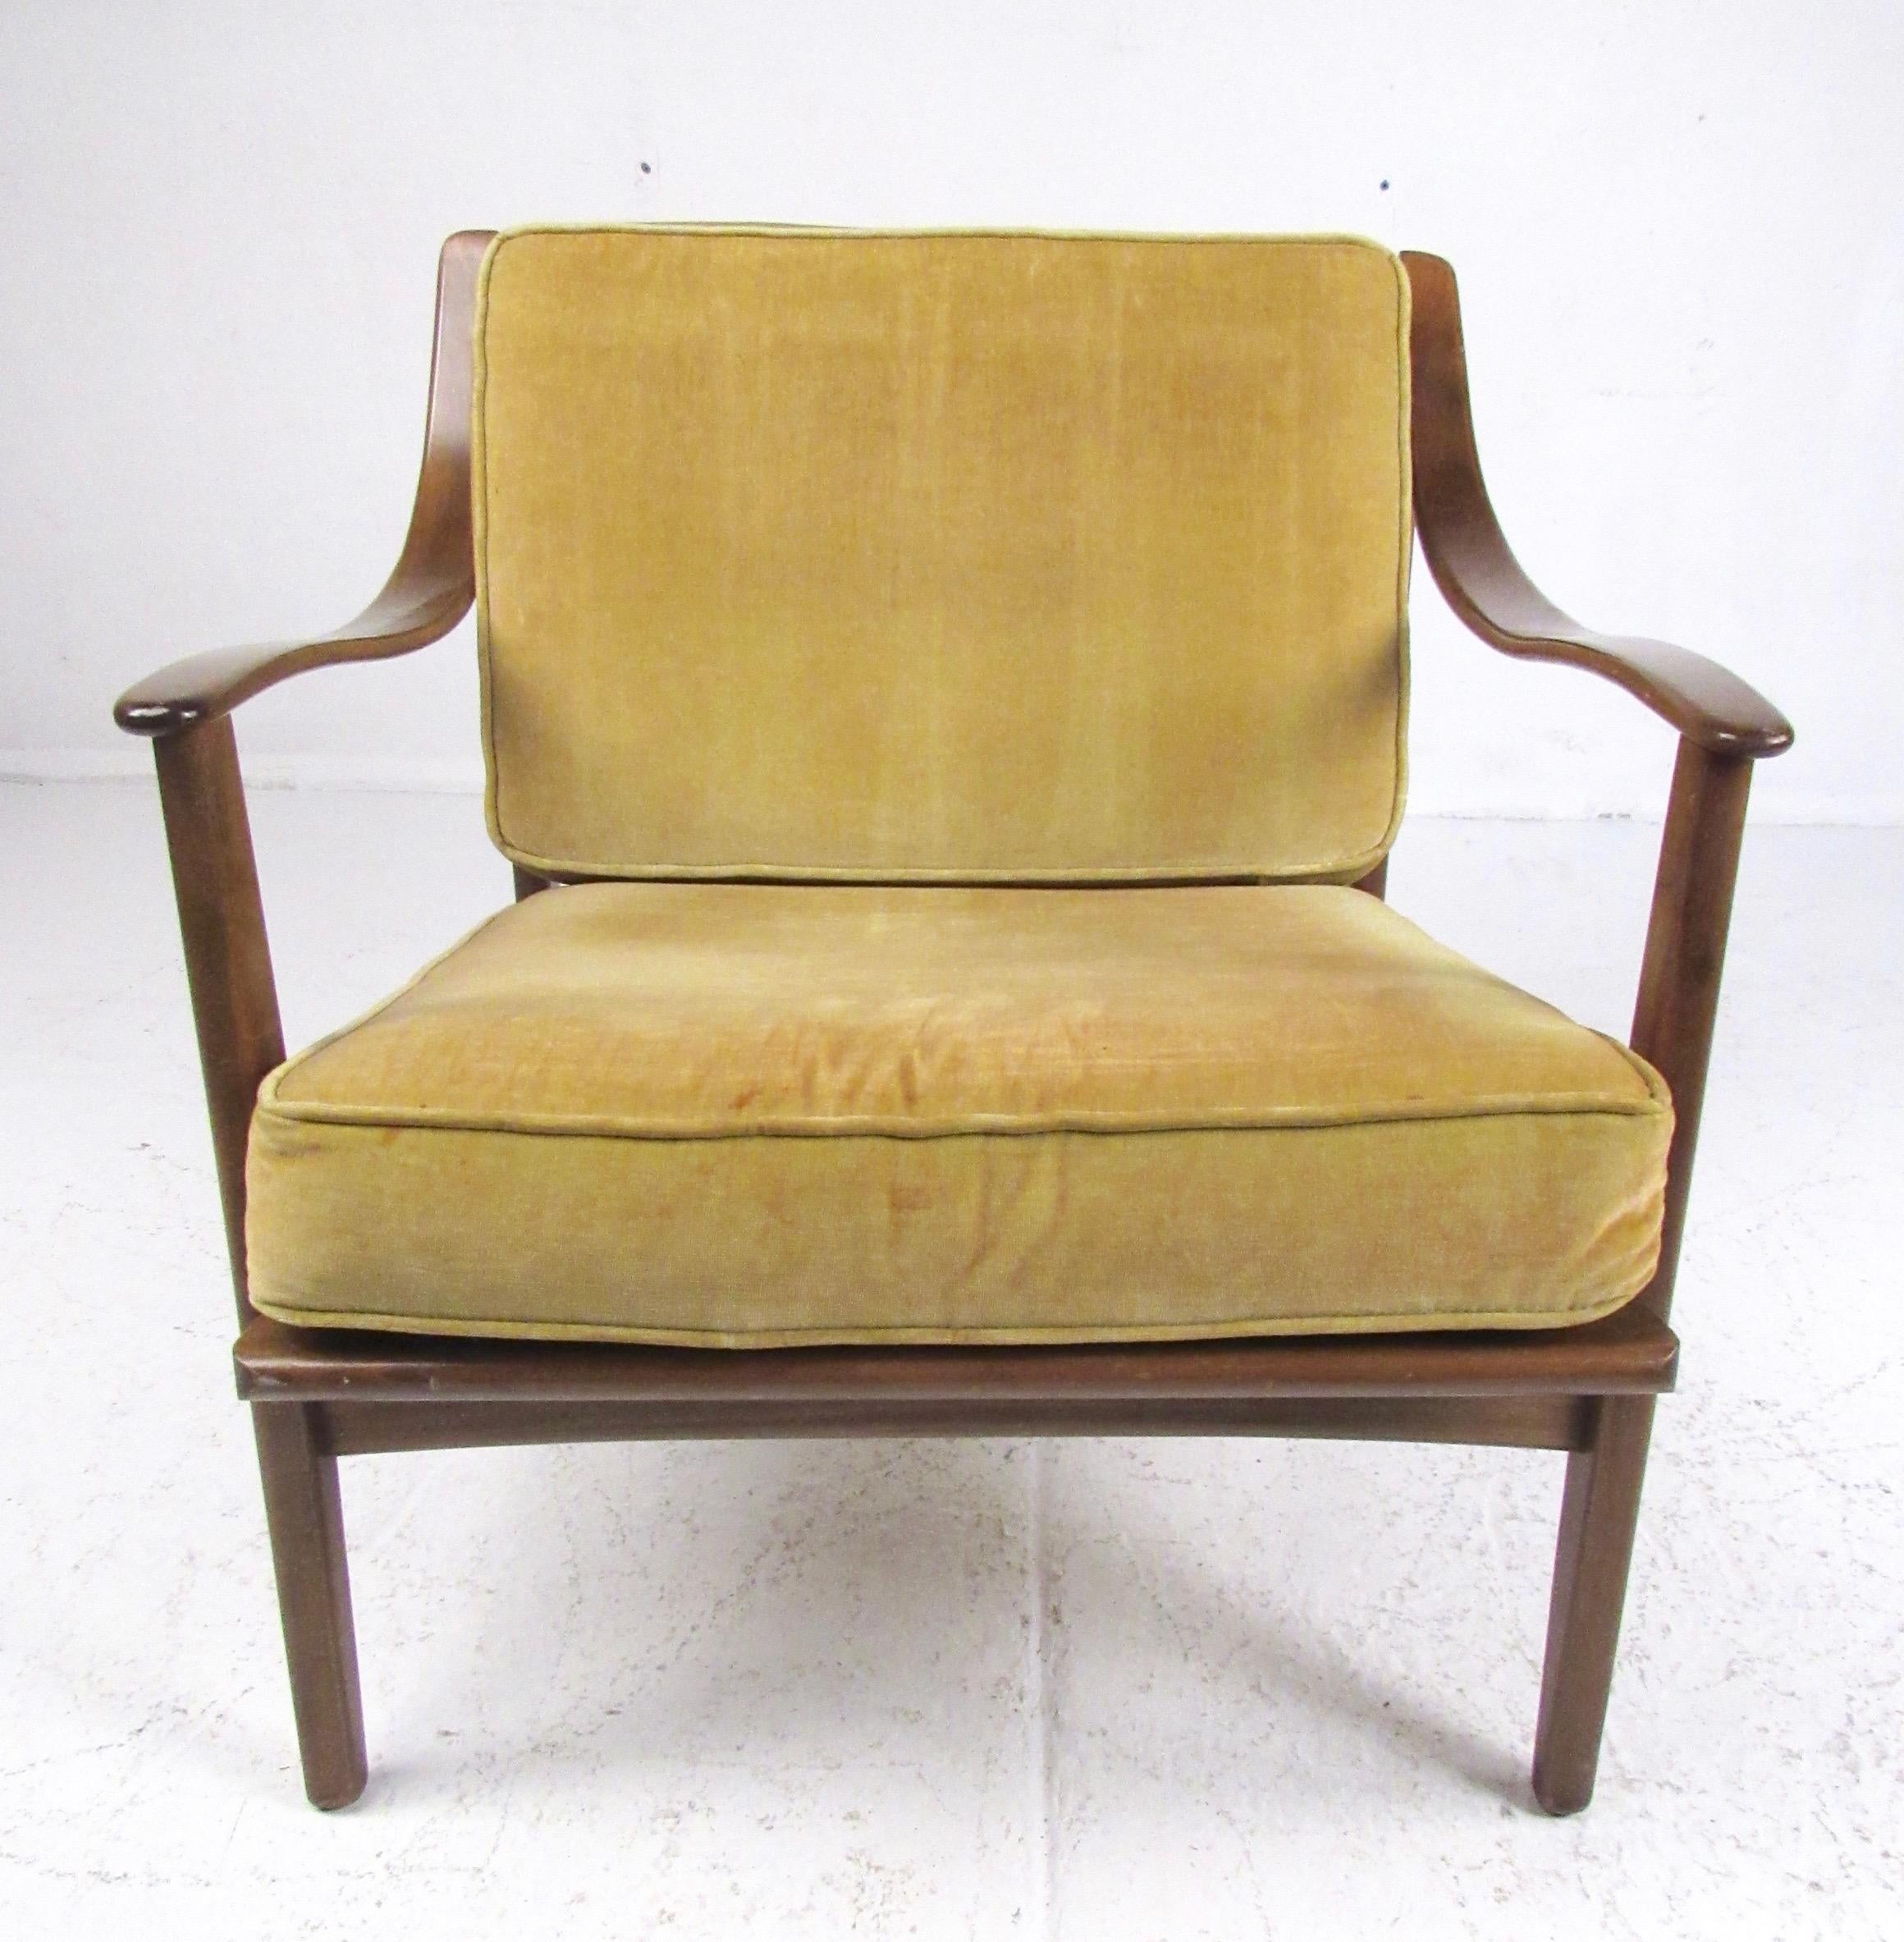 Vintage modern lounge chairs features sculptural walnut construction with vintage upholstered cushion. The impressive Mid-Century Modern design of the chair makes a comfortable seating addition to home or office arrangements. Please confirm item